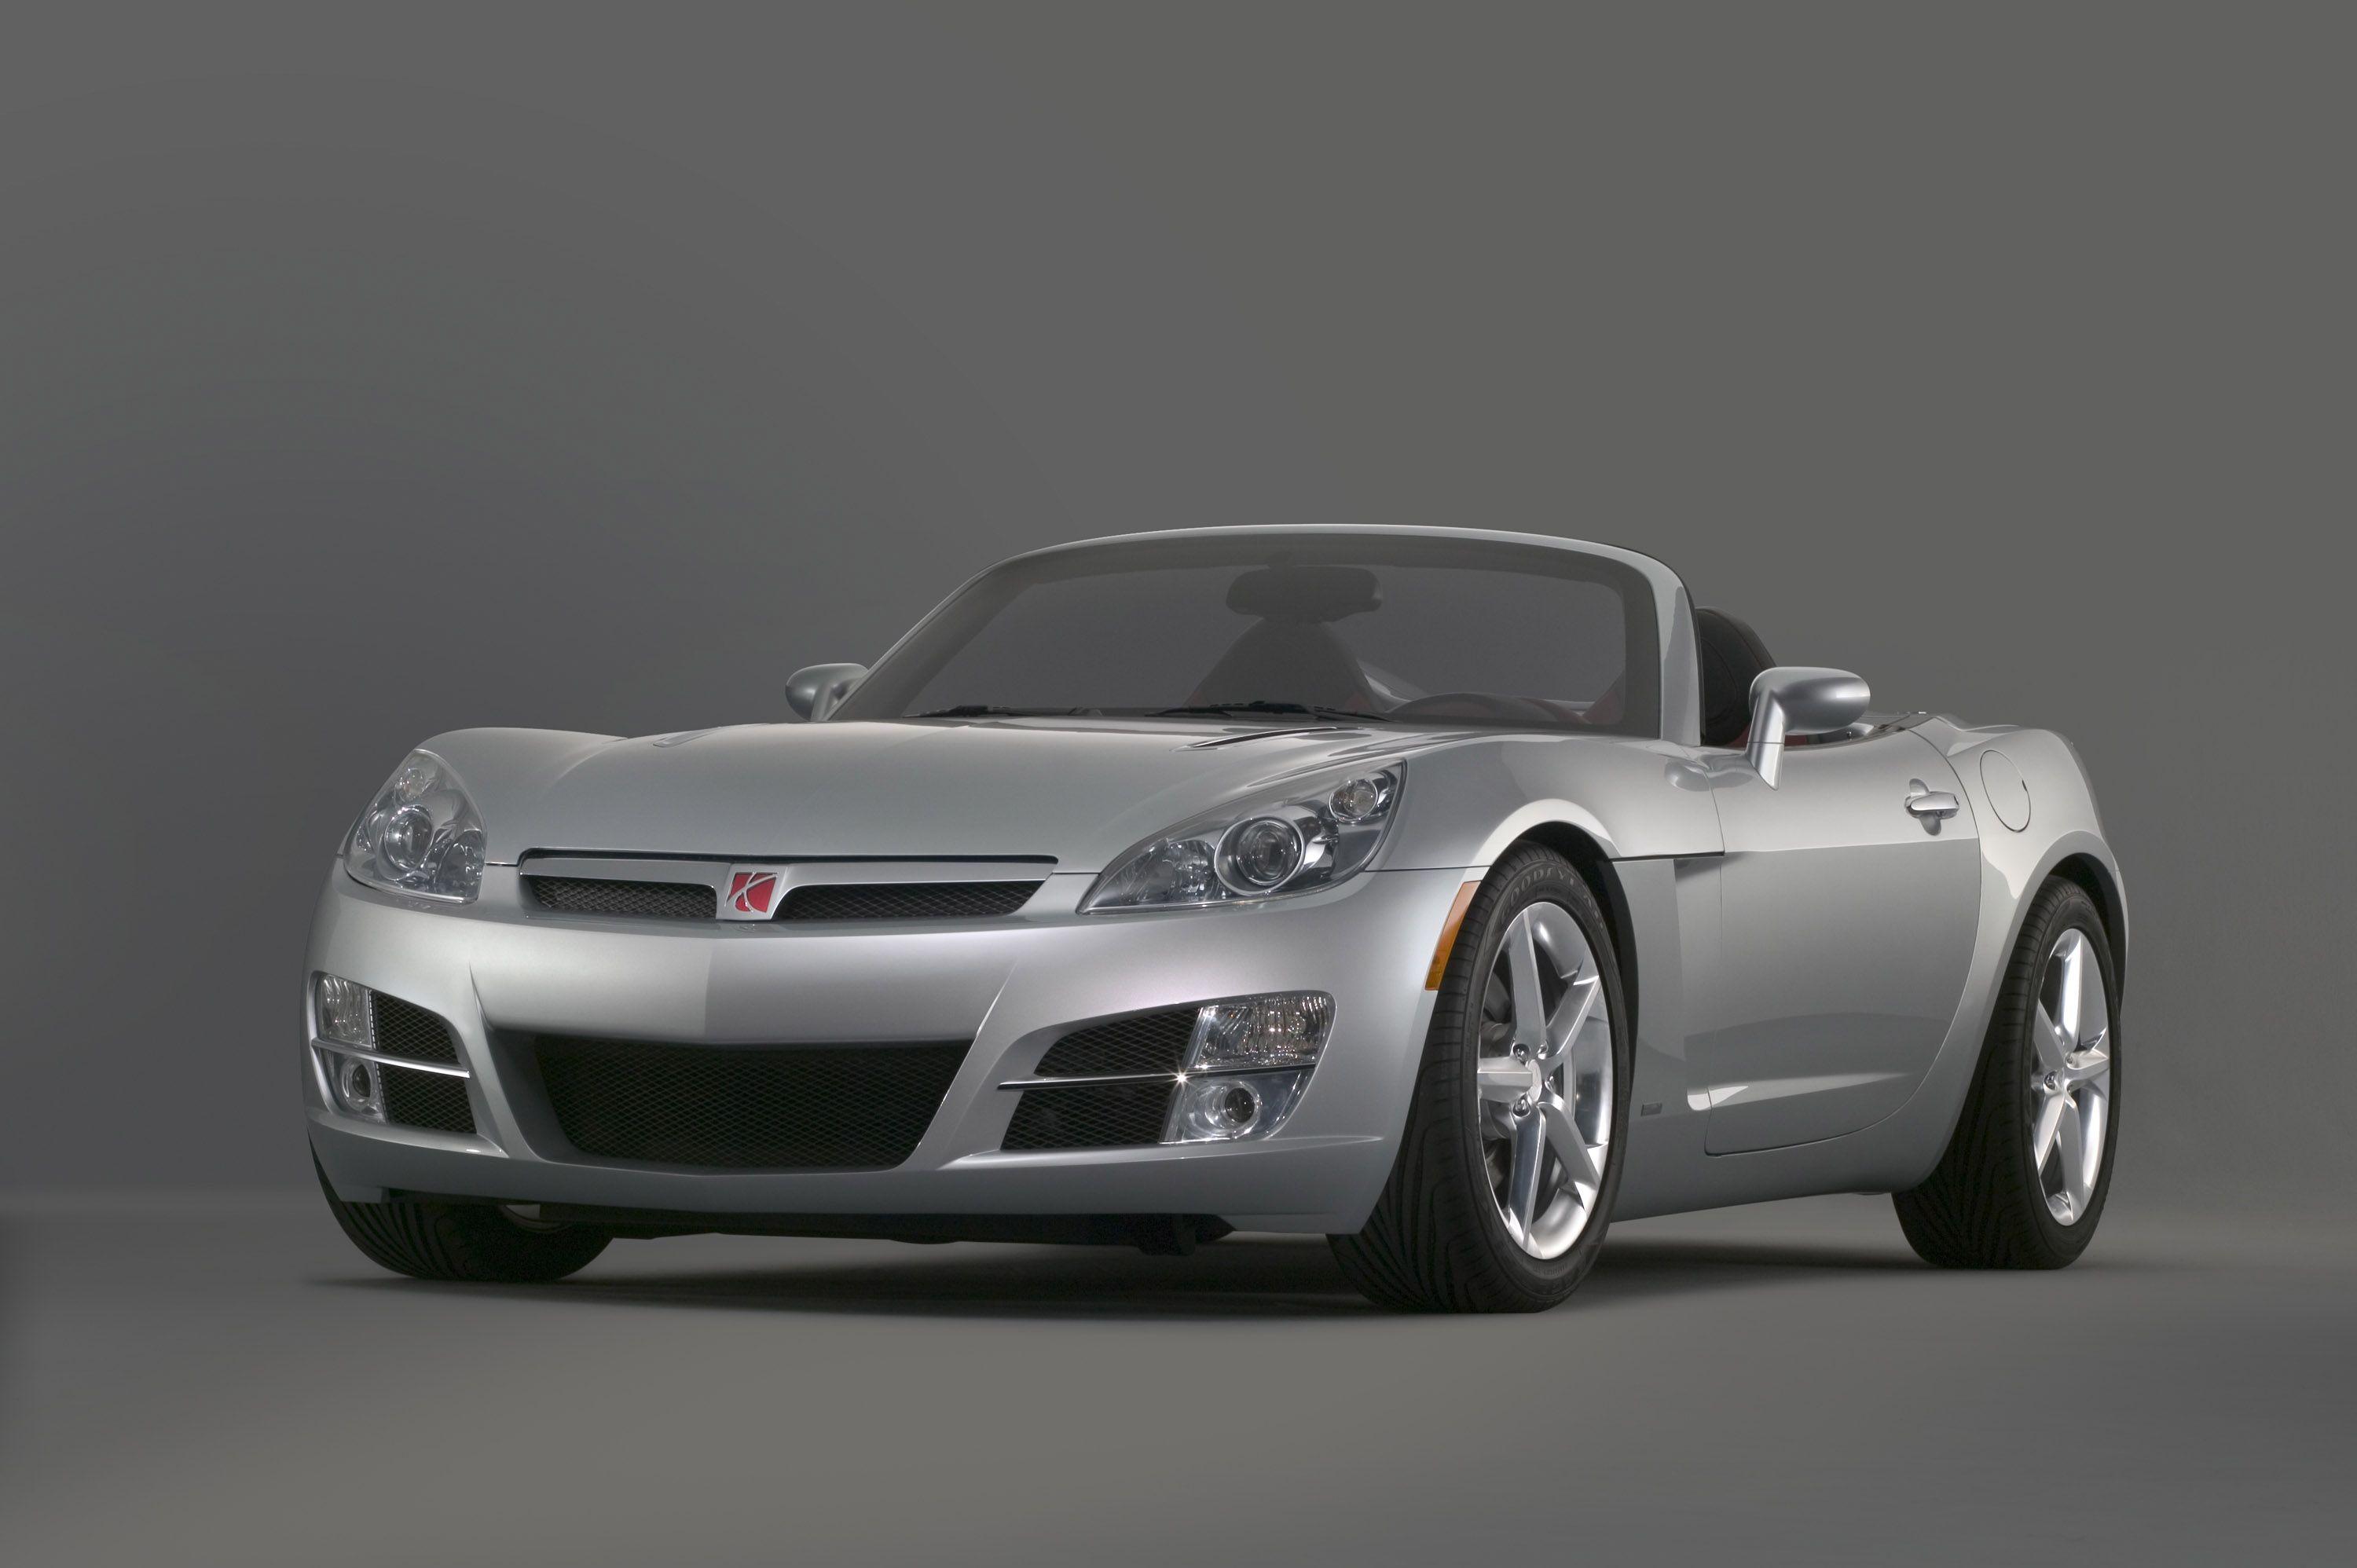 Saturn Sky Picture, Photo, Wallpaper